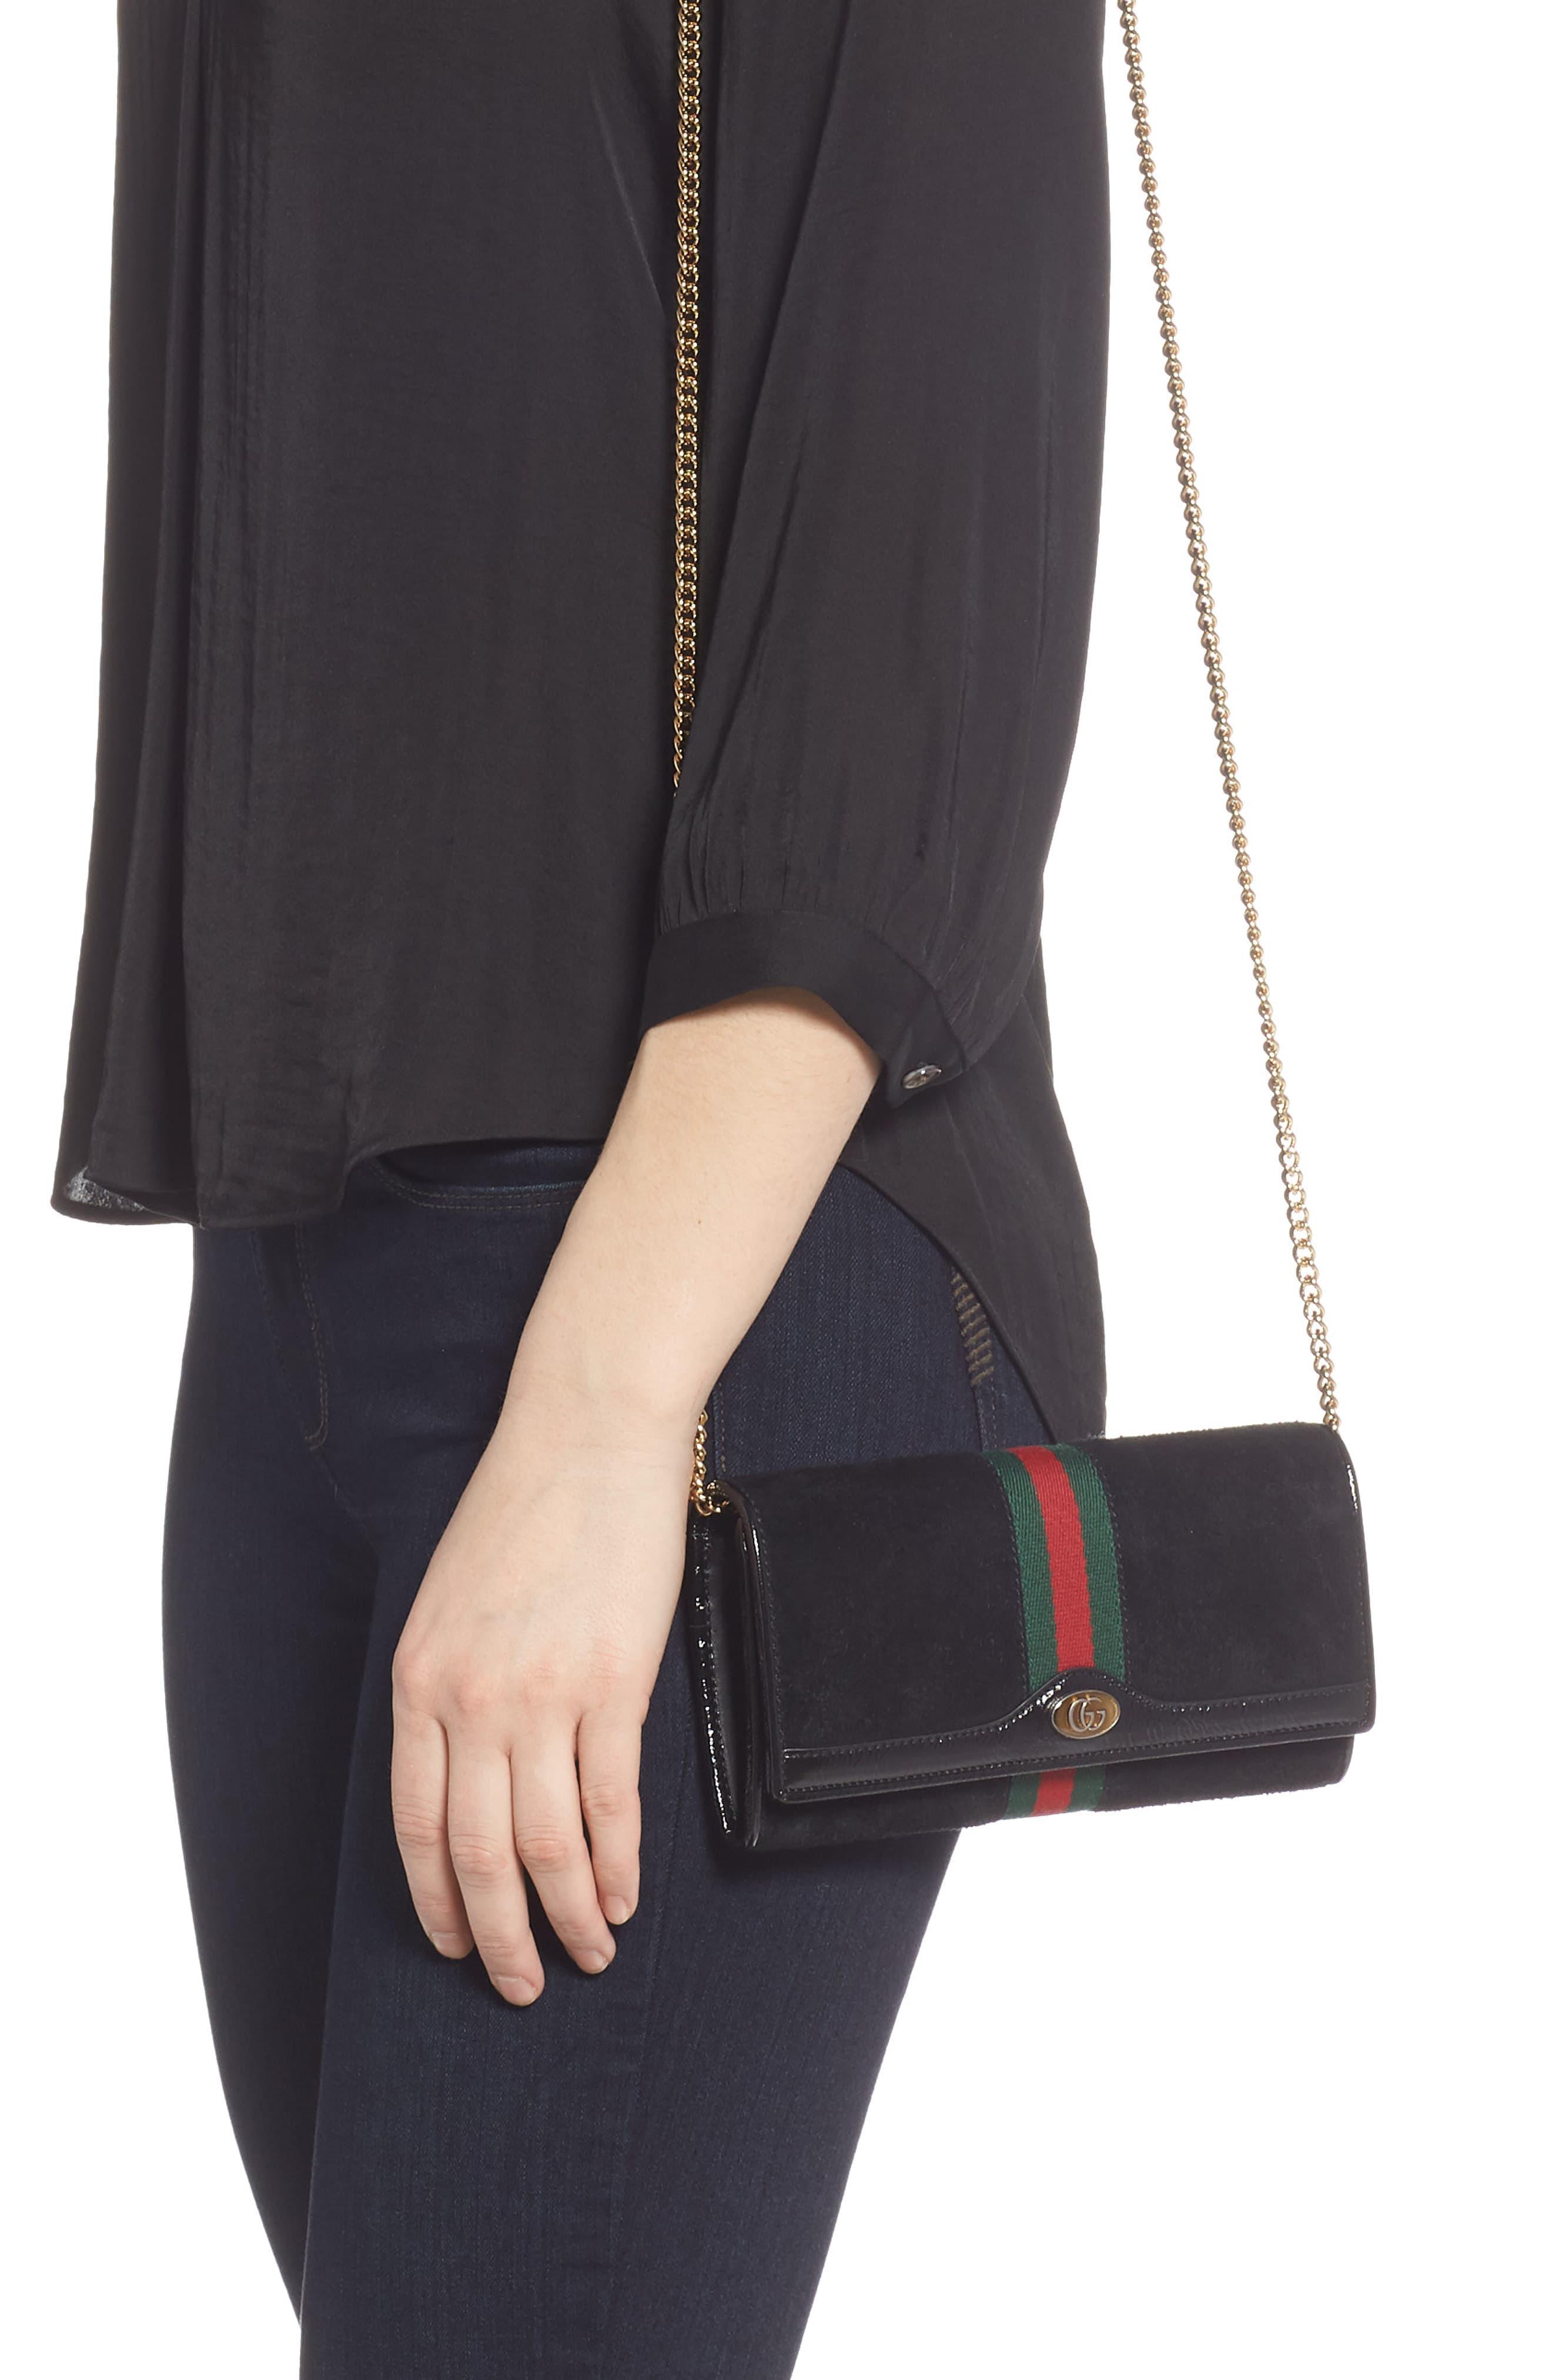 Gucci Ophidia Suede Continental Wallet in Black - Lyst